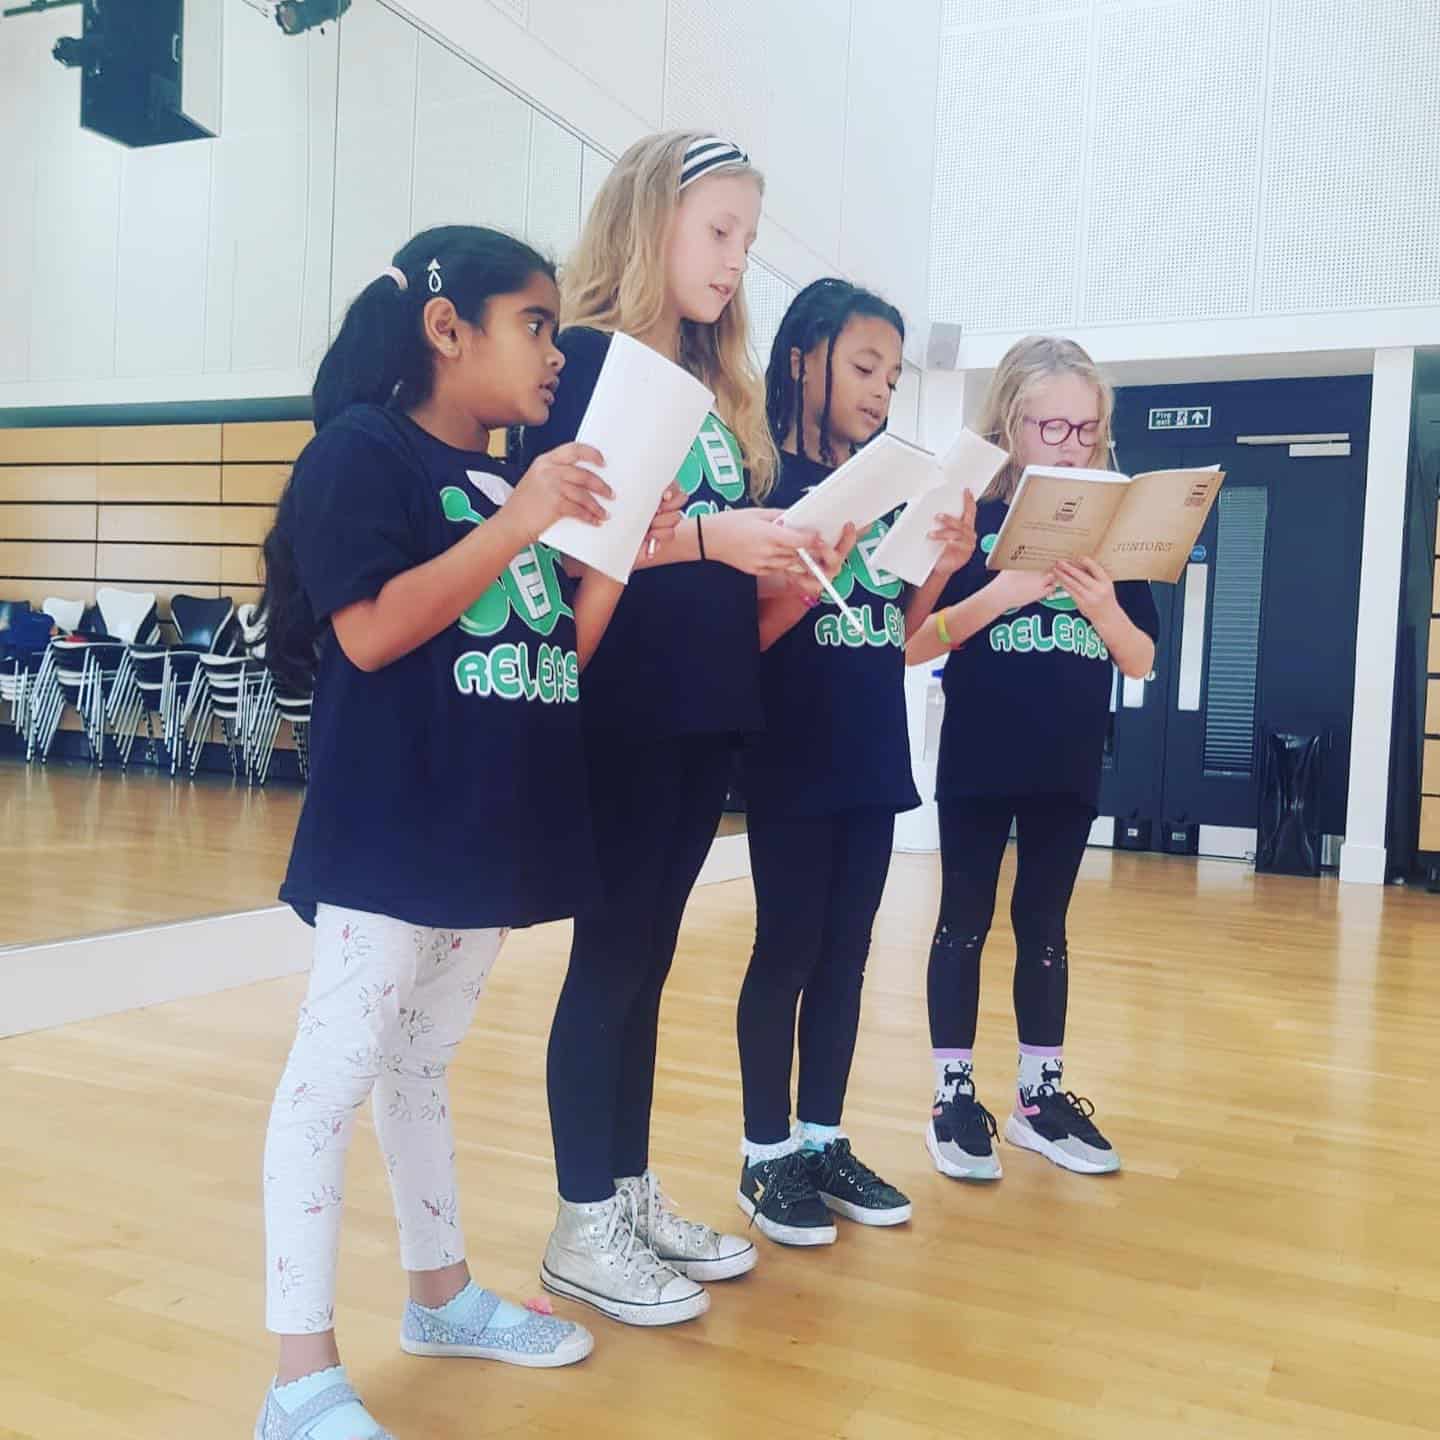 learners in a group preforming